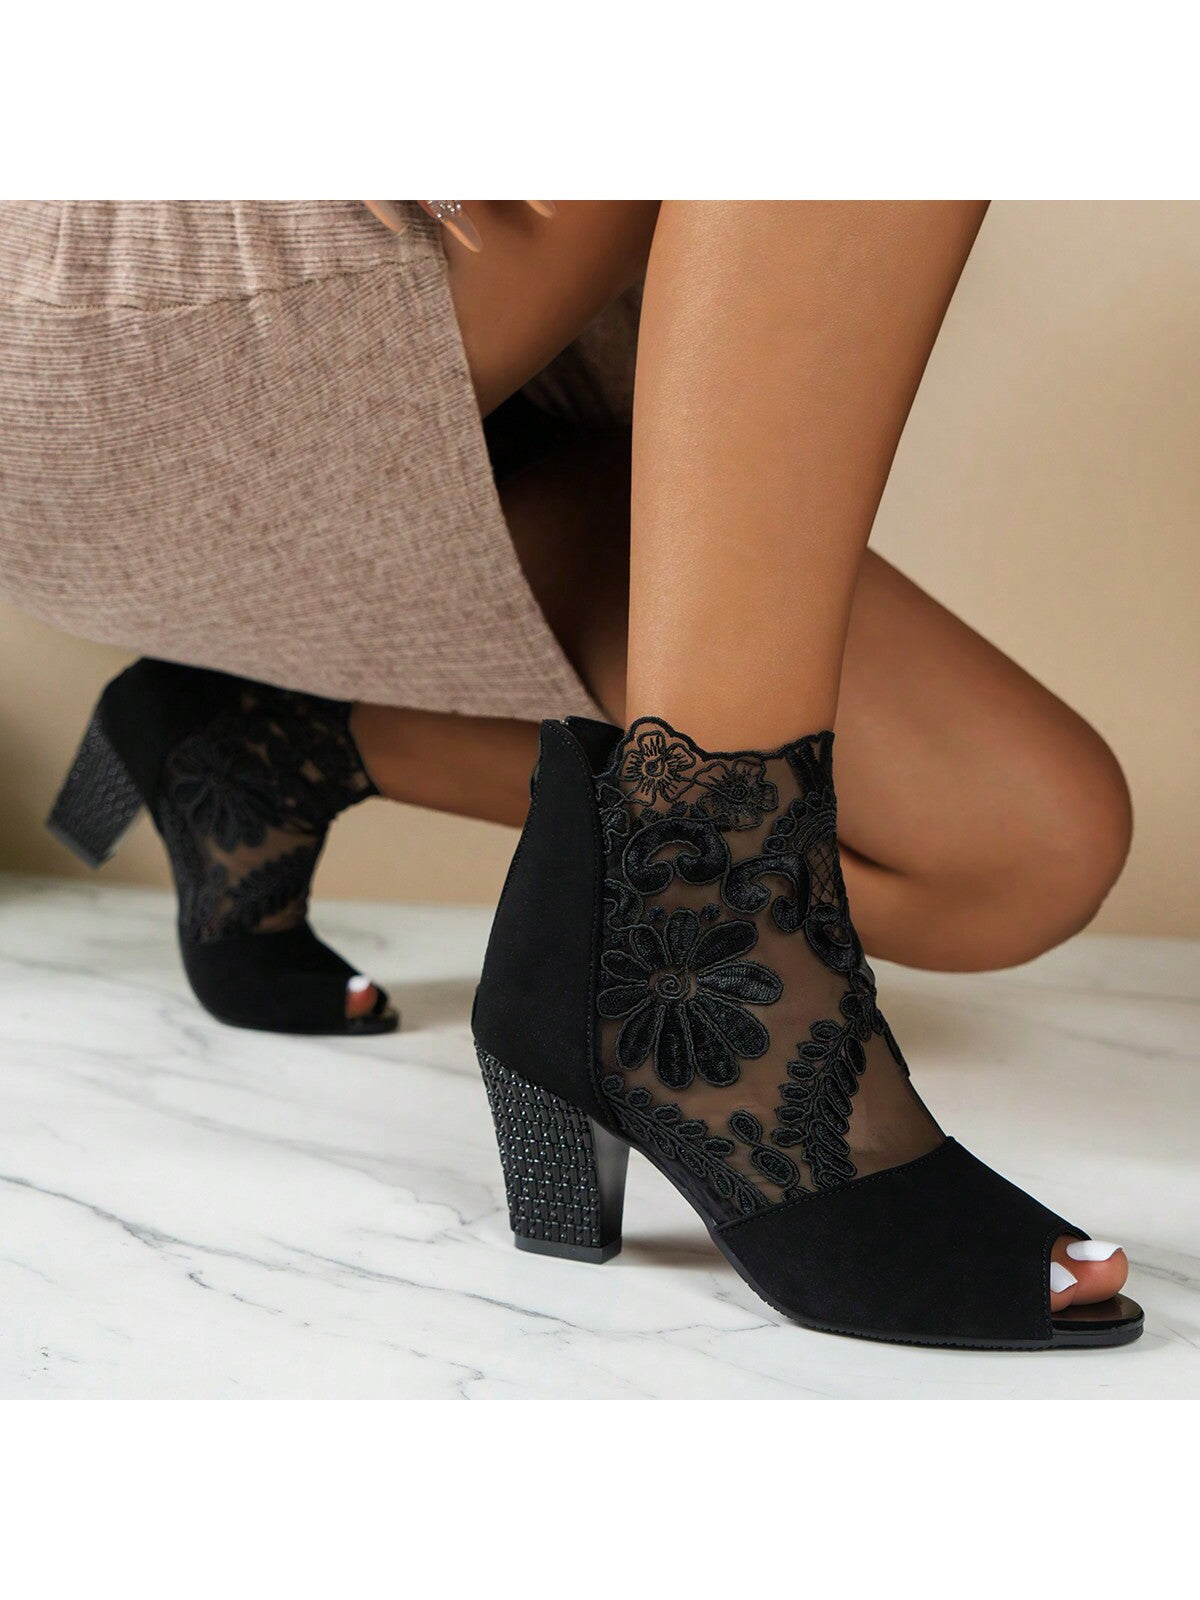 Women's Black Embroidered High Heel Mesh Boots